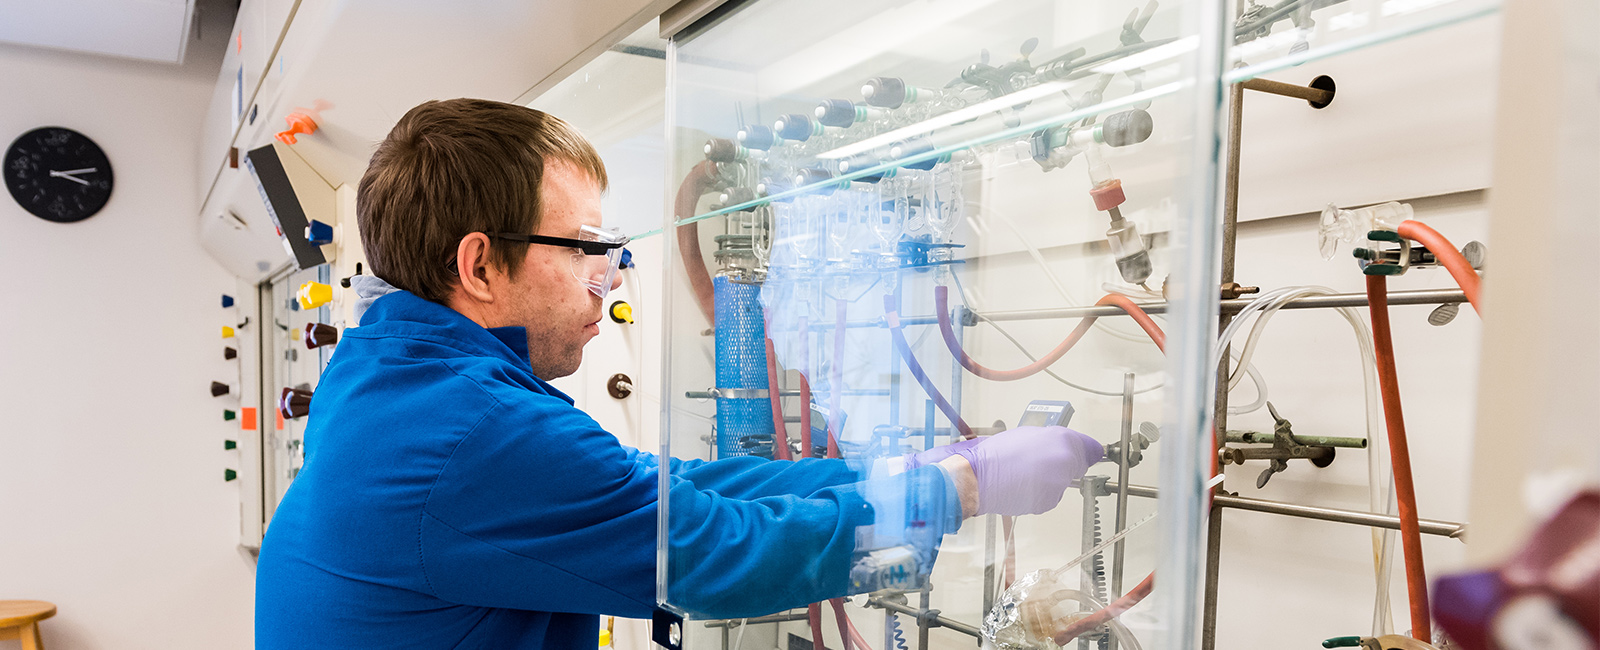 A graduate student conducts research at a fume hood.